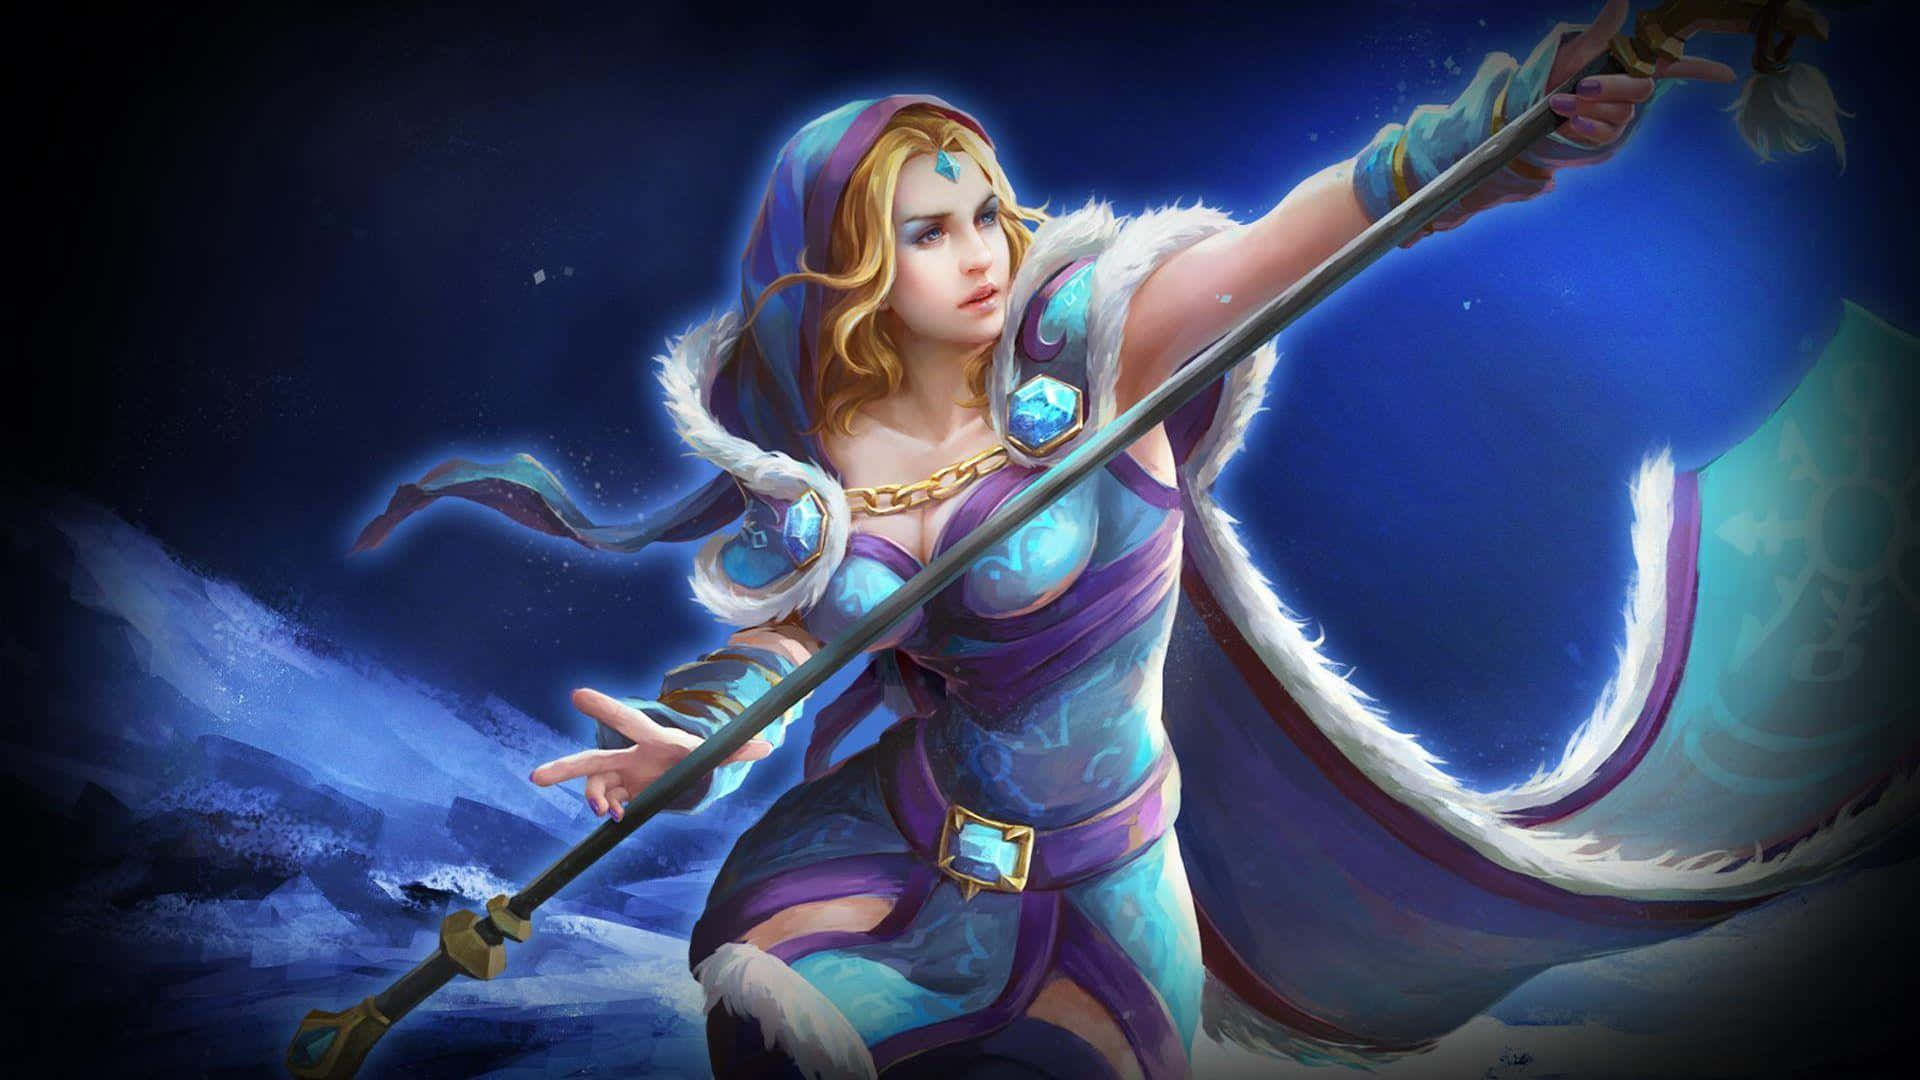 Crystal Maiden - The Frosty Sorceress Wallpaper